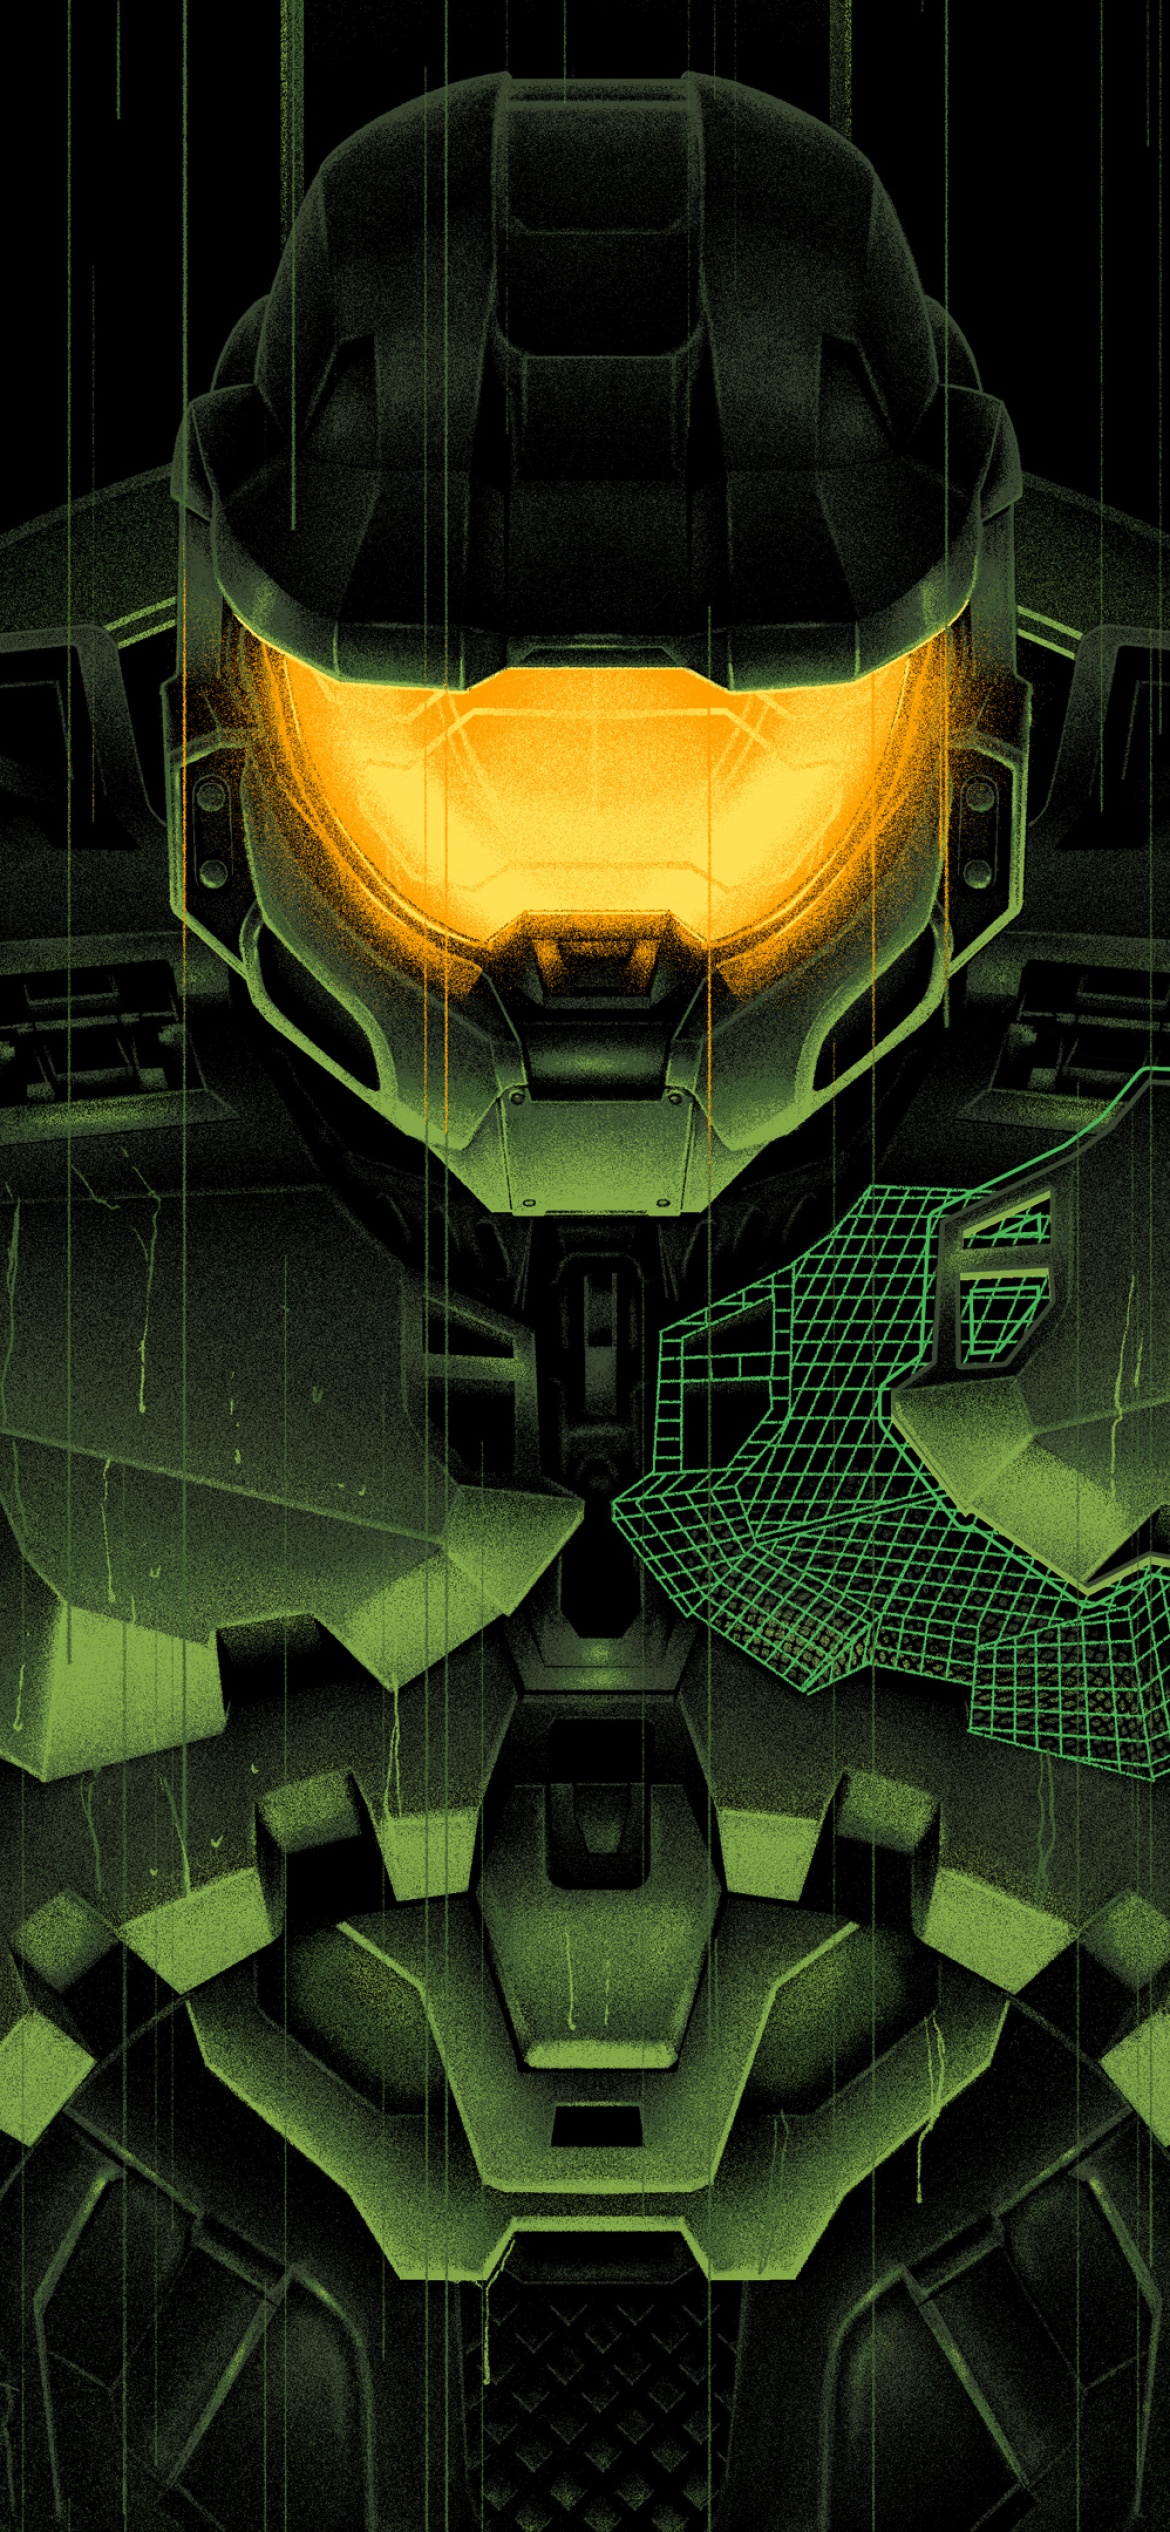 Halo Master Chief IPhone Wallpaper  IPhone Wallpapers  iPhone Wallpapers